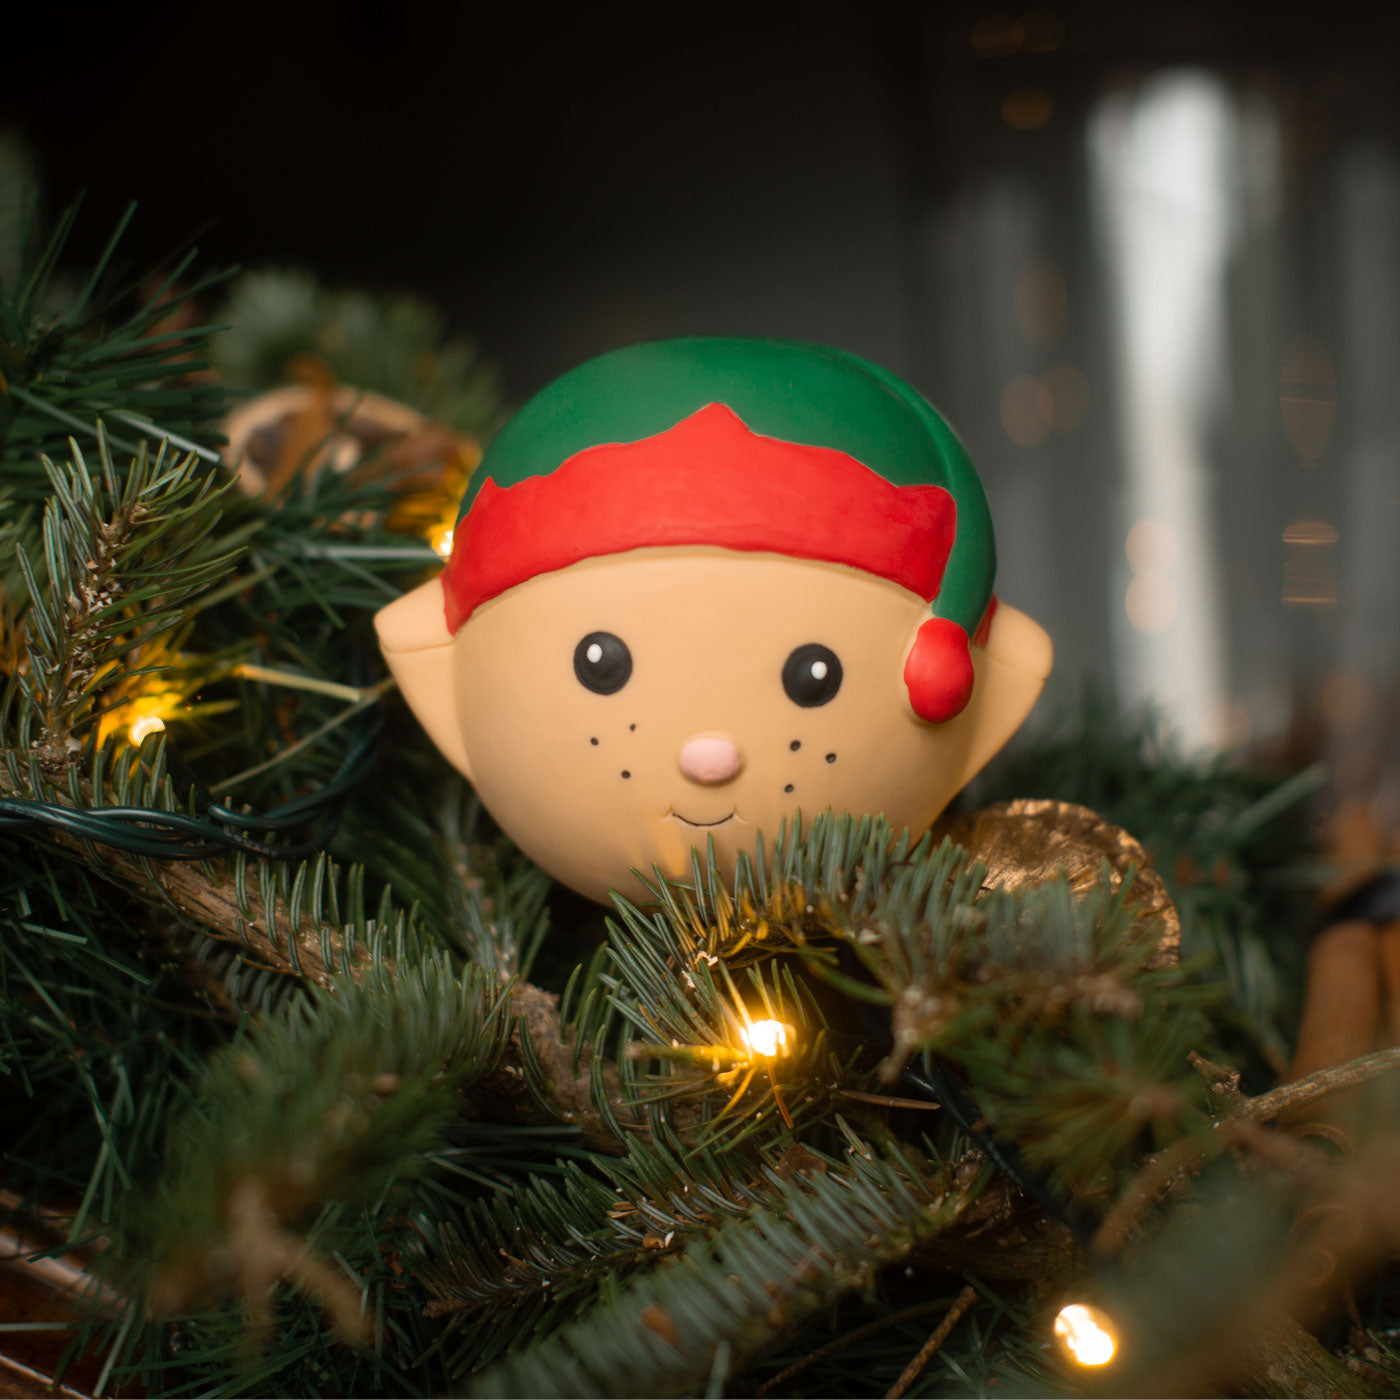 Petface Elfred Elf Ball Toy